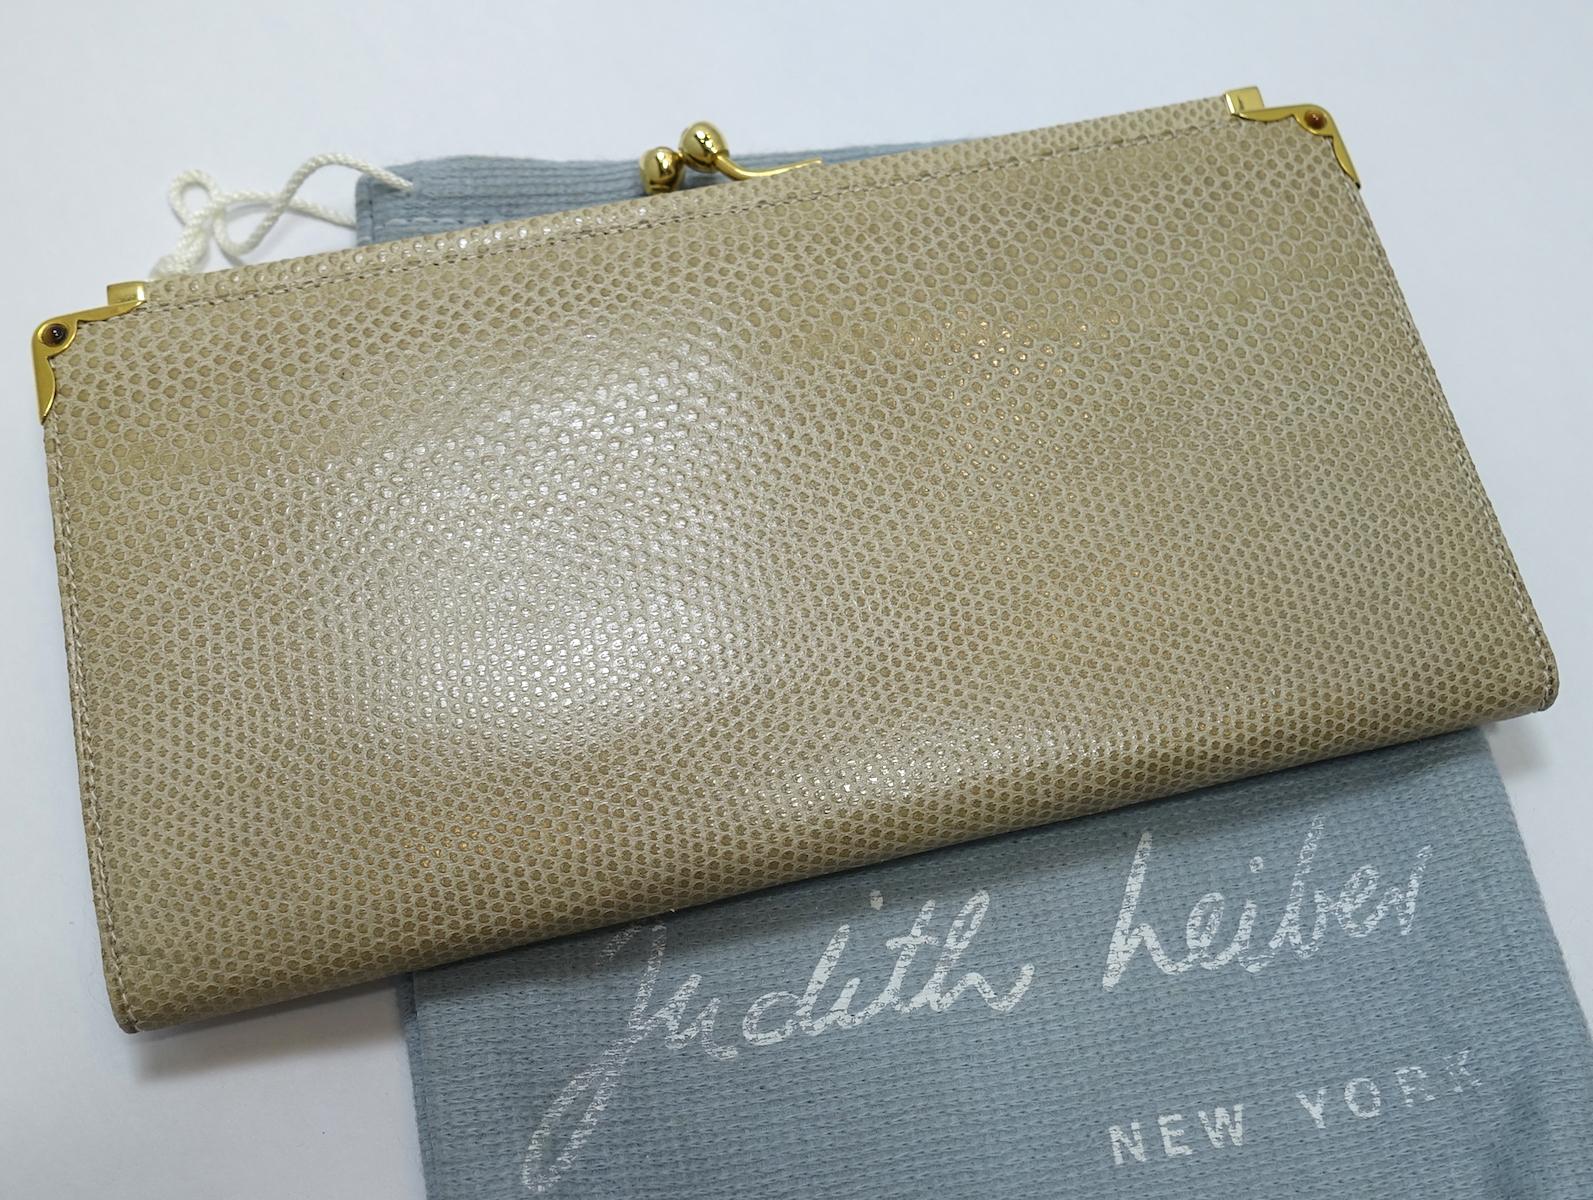 This vintage signed Judith Leiber wallet features a change purse with snap closure. Inside have a zipper compartment and a check holder slide pocket with gold tone snap clasp.  This change purse wallet measures 7-1/4” x 4” and is signed “Judith